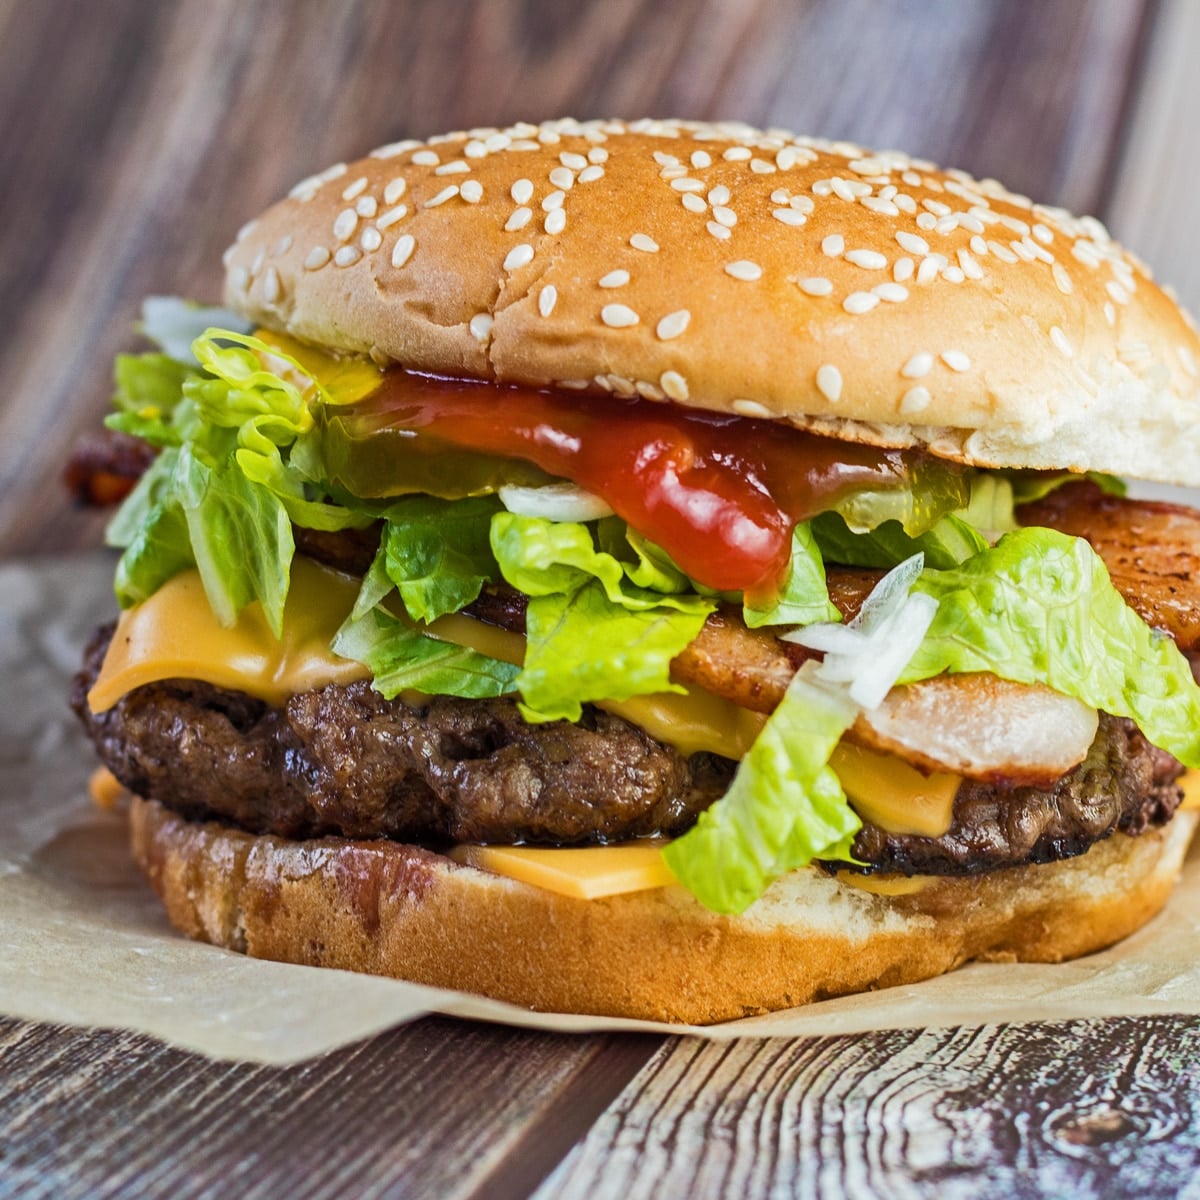 Square image of cheeseburger with lettuce.